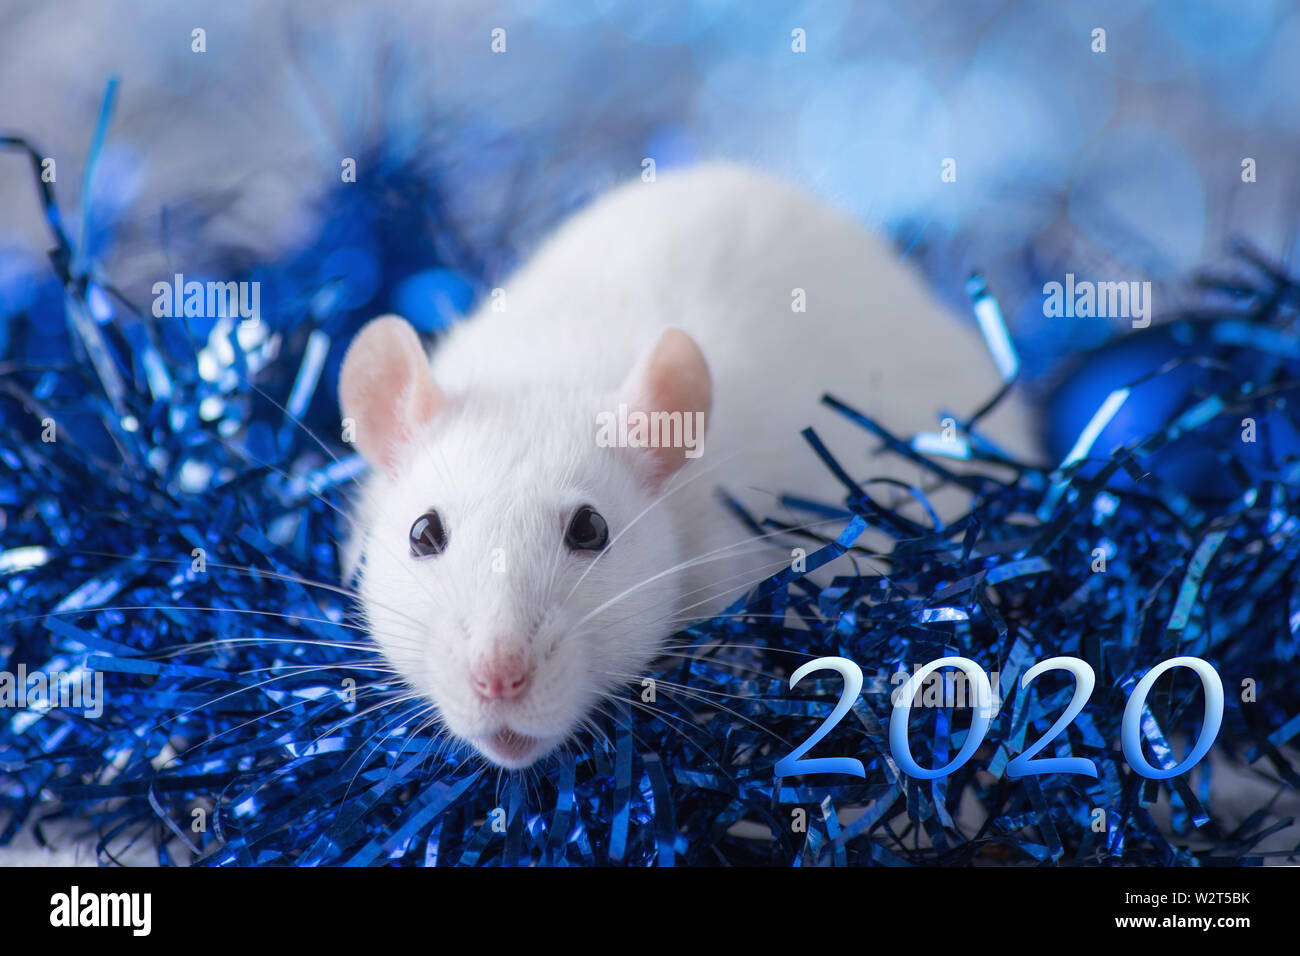 Happy New Year! Symbol of New Year 2020 - white or metal (silver) rat. Cute rat with Christmas decorated Stock Photo